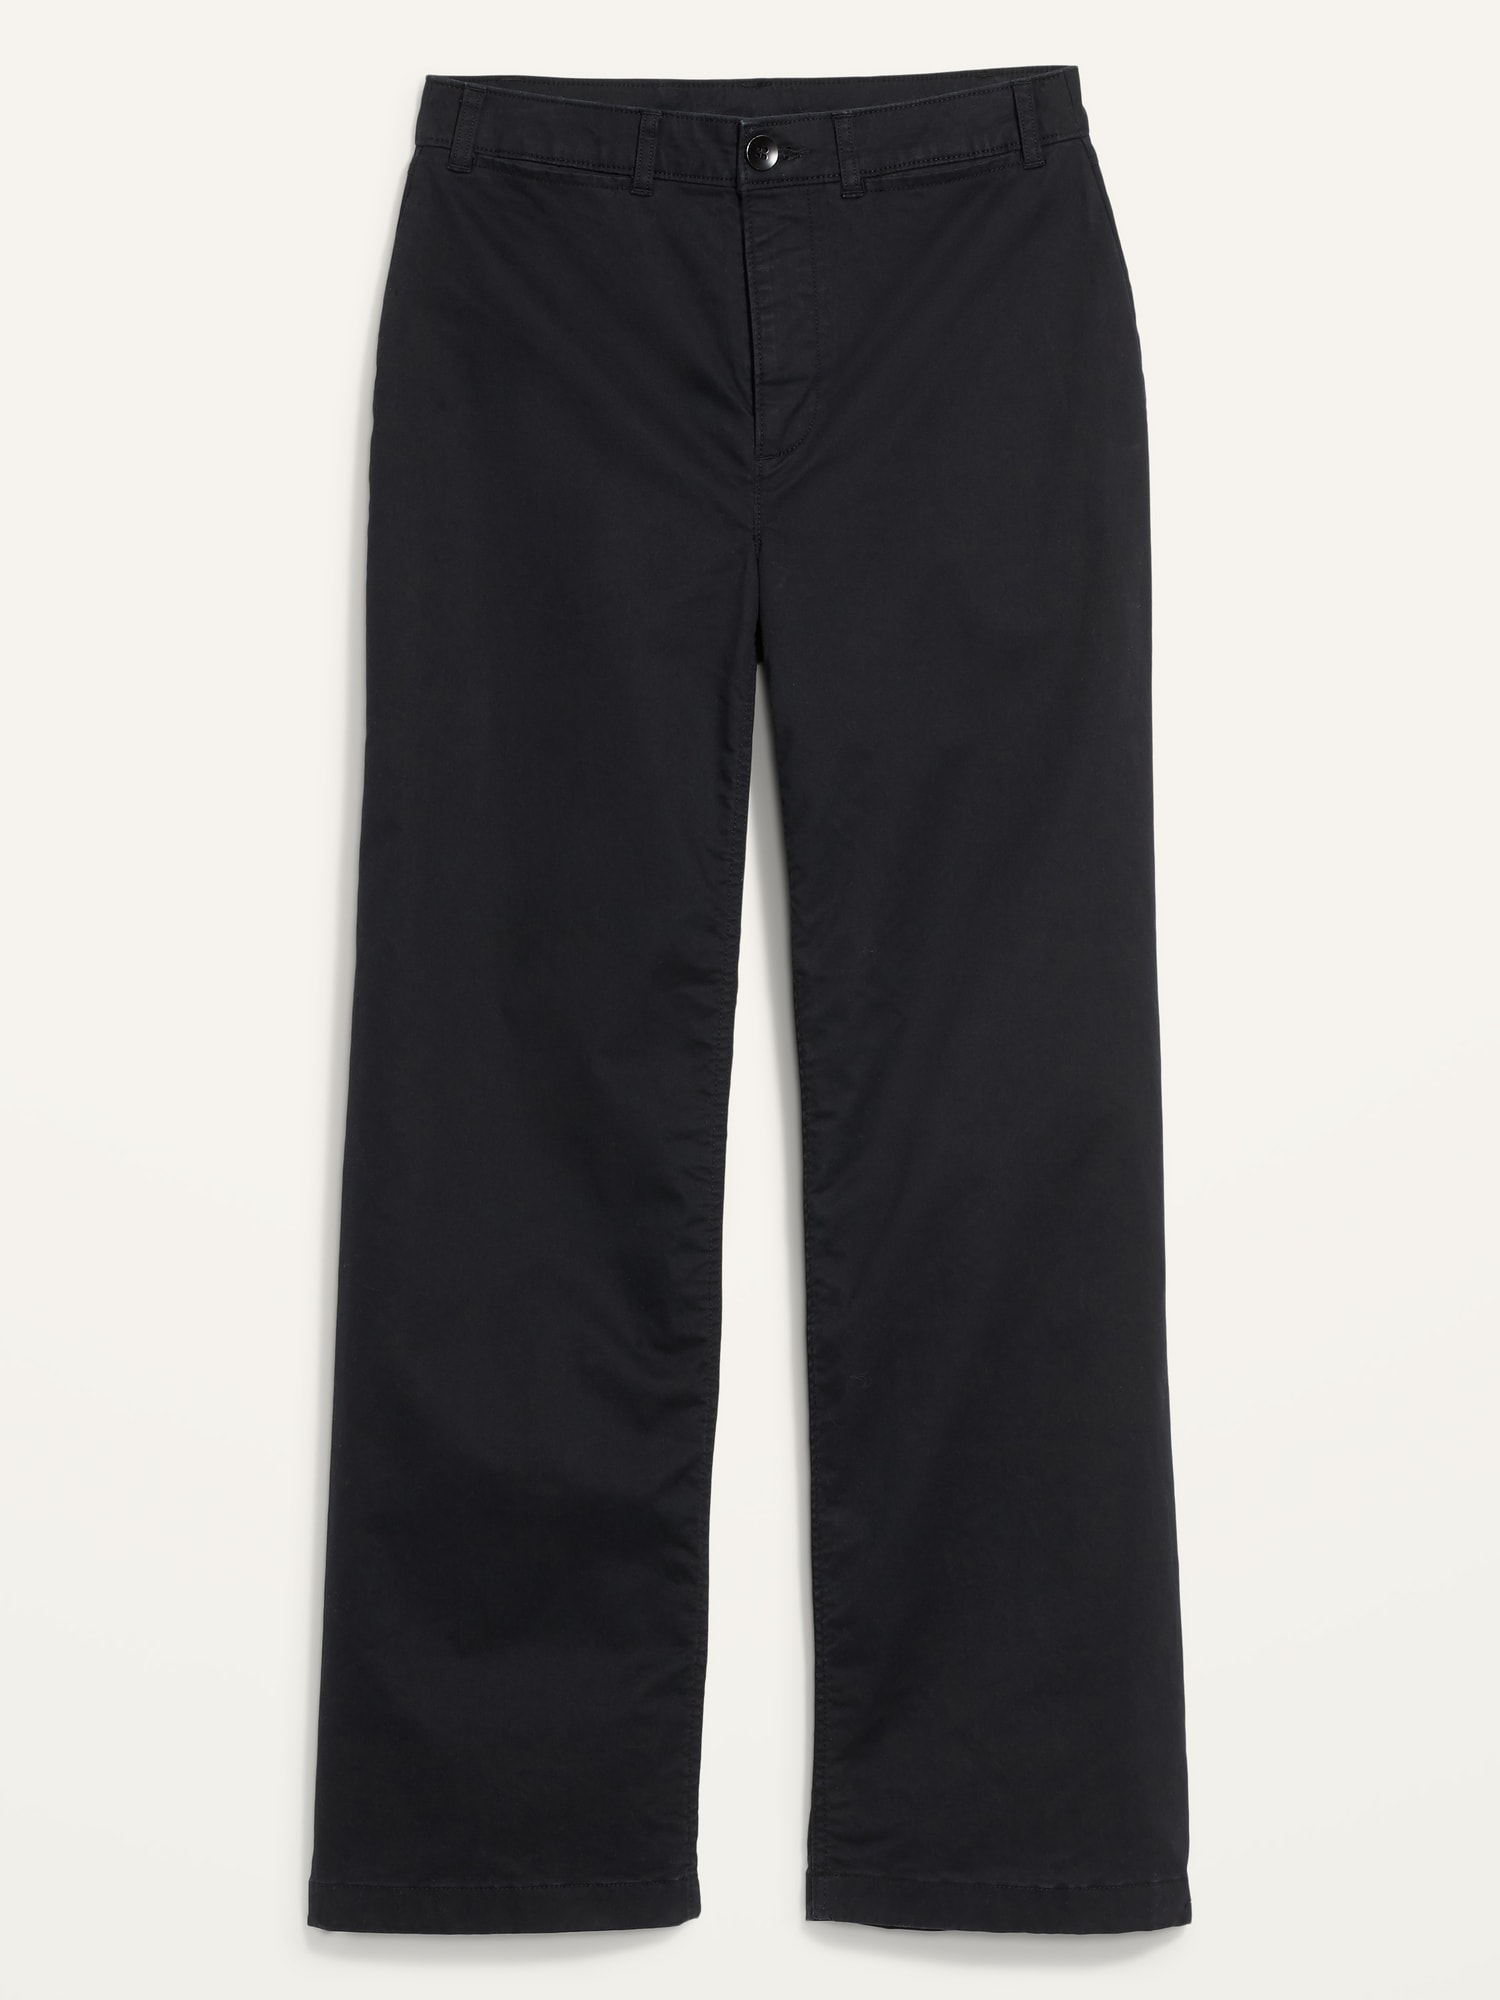 Extra High-Waisted Wide-Leg Pants for Women | Old Navy